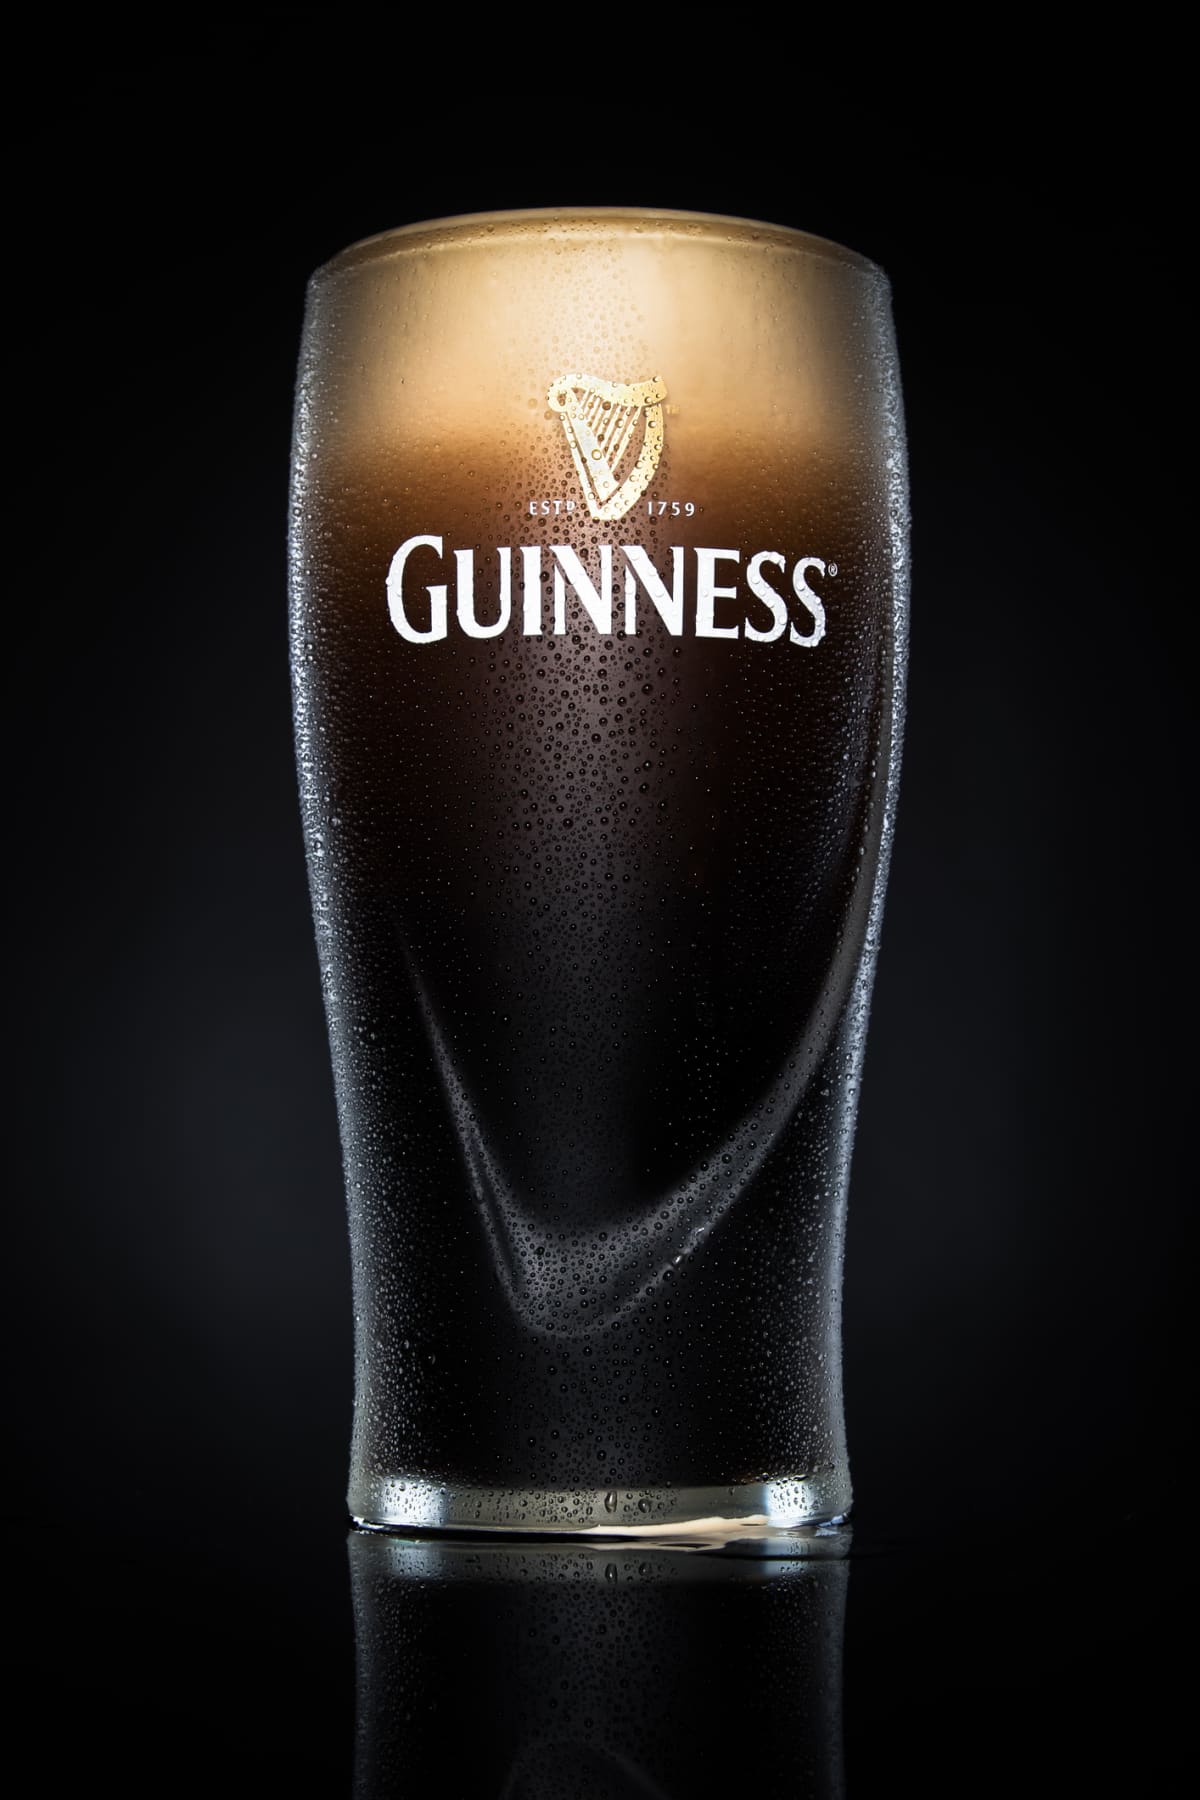 A pint of Guinness beer is pictured in London, on May 9, 2008. Diageo, the alcoholic beverages giant, said Friday it plans to overhaul its Guinness operations in Ireland in a bid to cut costs and boost production of the distinctive black stout. Diageo, the world's biggest maker of alcoholic drinks, said it would close two breweries and renovate its famous St. James's Gate brewery in the centre of Dublin -- where Guinness has been made for the past 250 years. AFP PHOTO/Leon Neal (Photo credit should read Leon Neal/AFP via Getty Images)